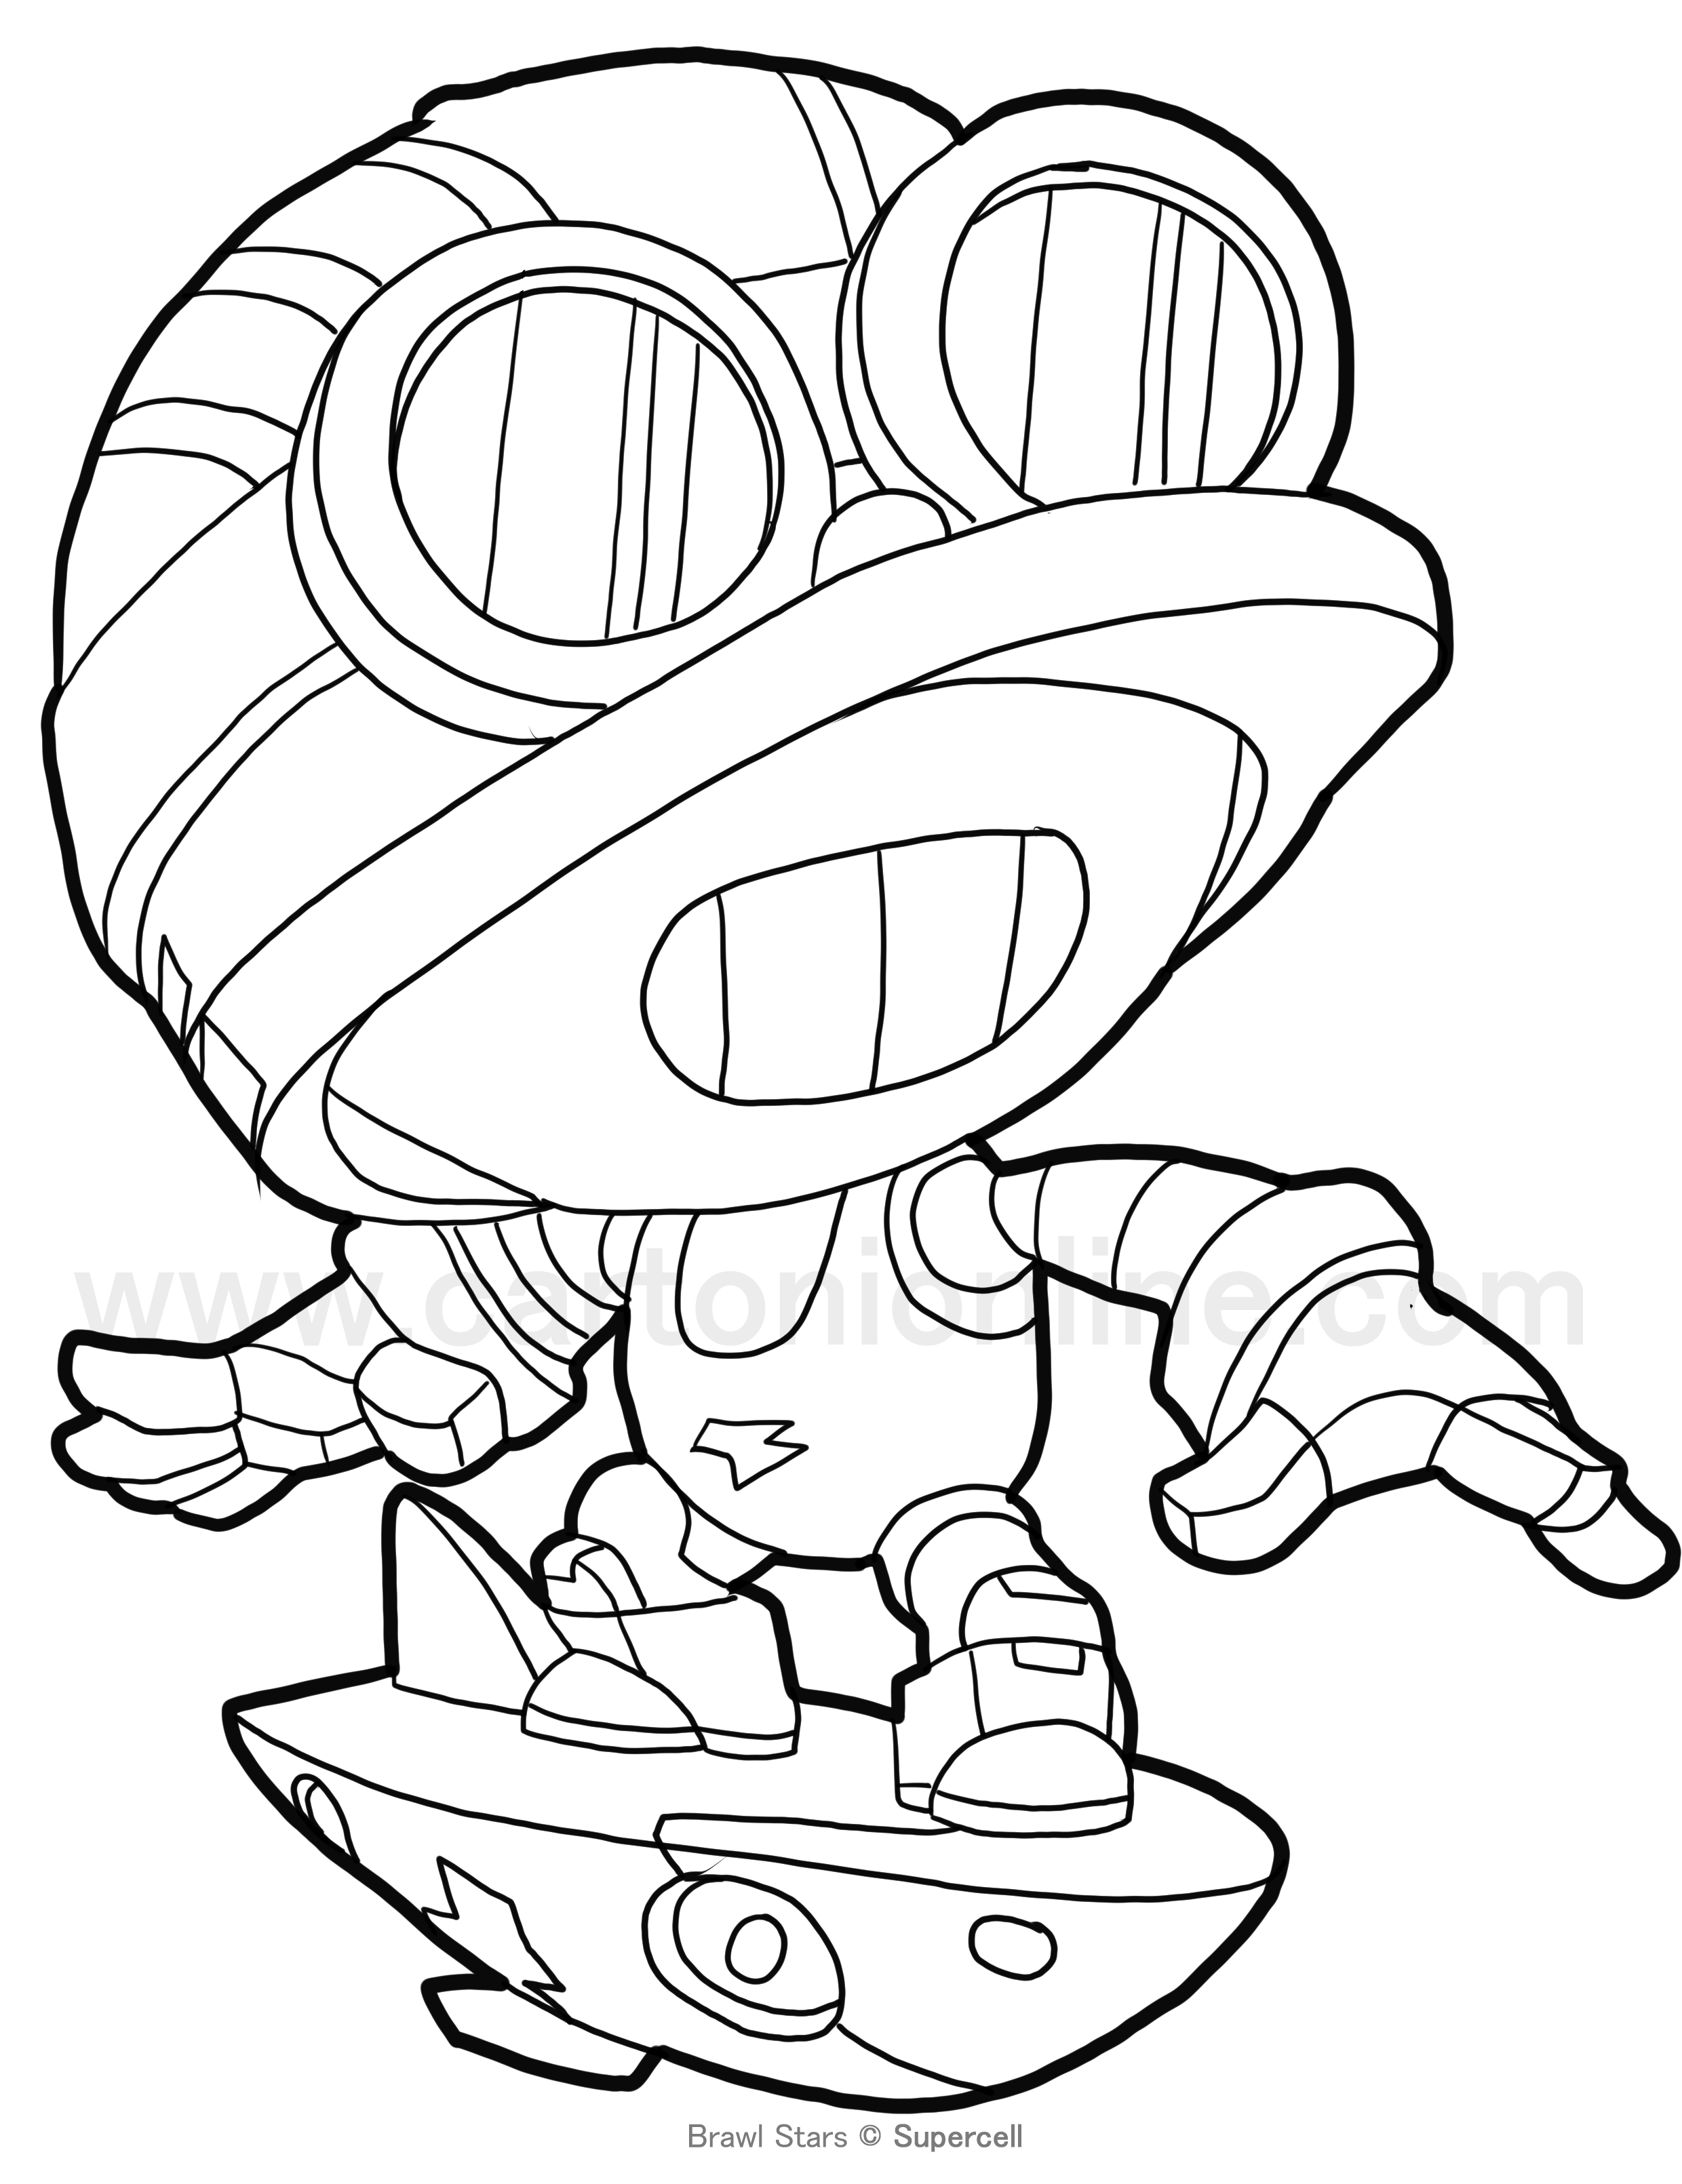 Jurassic Splash from Brawl Stars coloring page to print and coloring